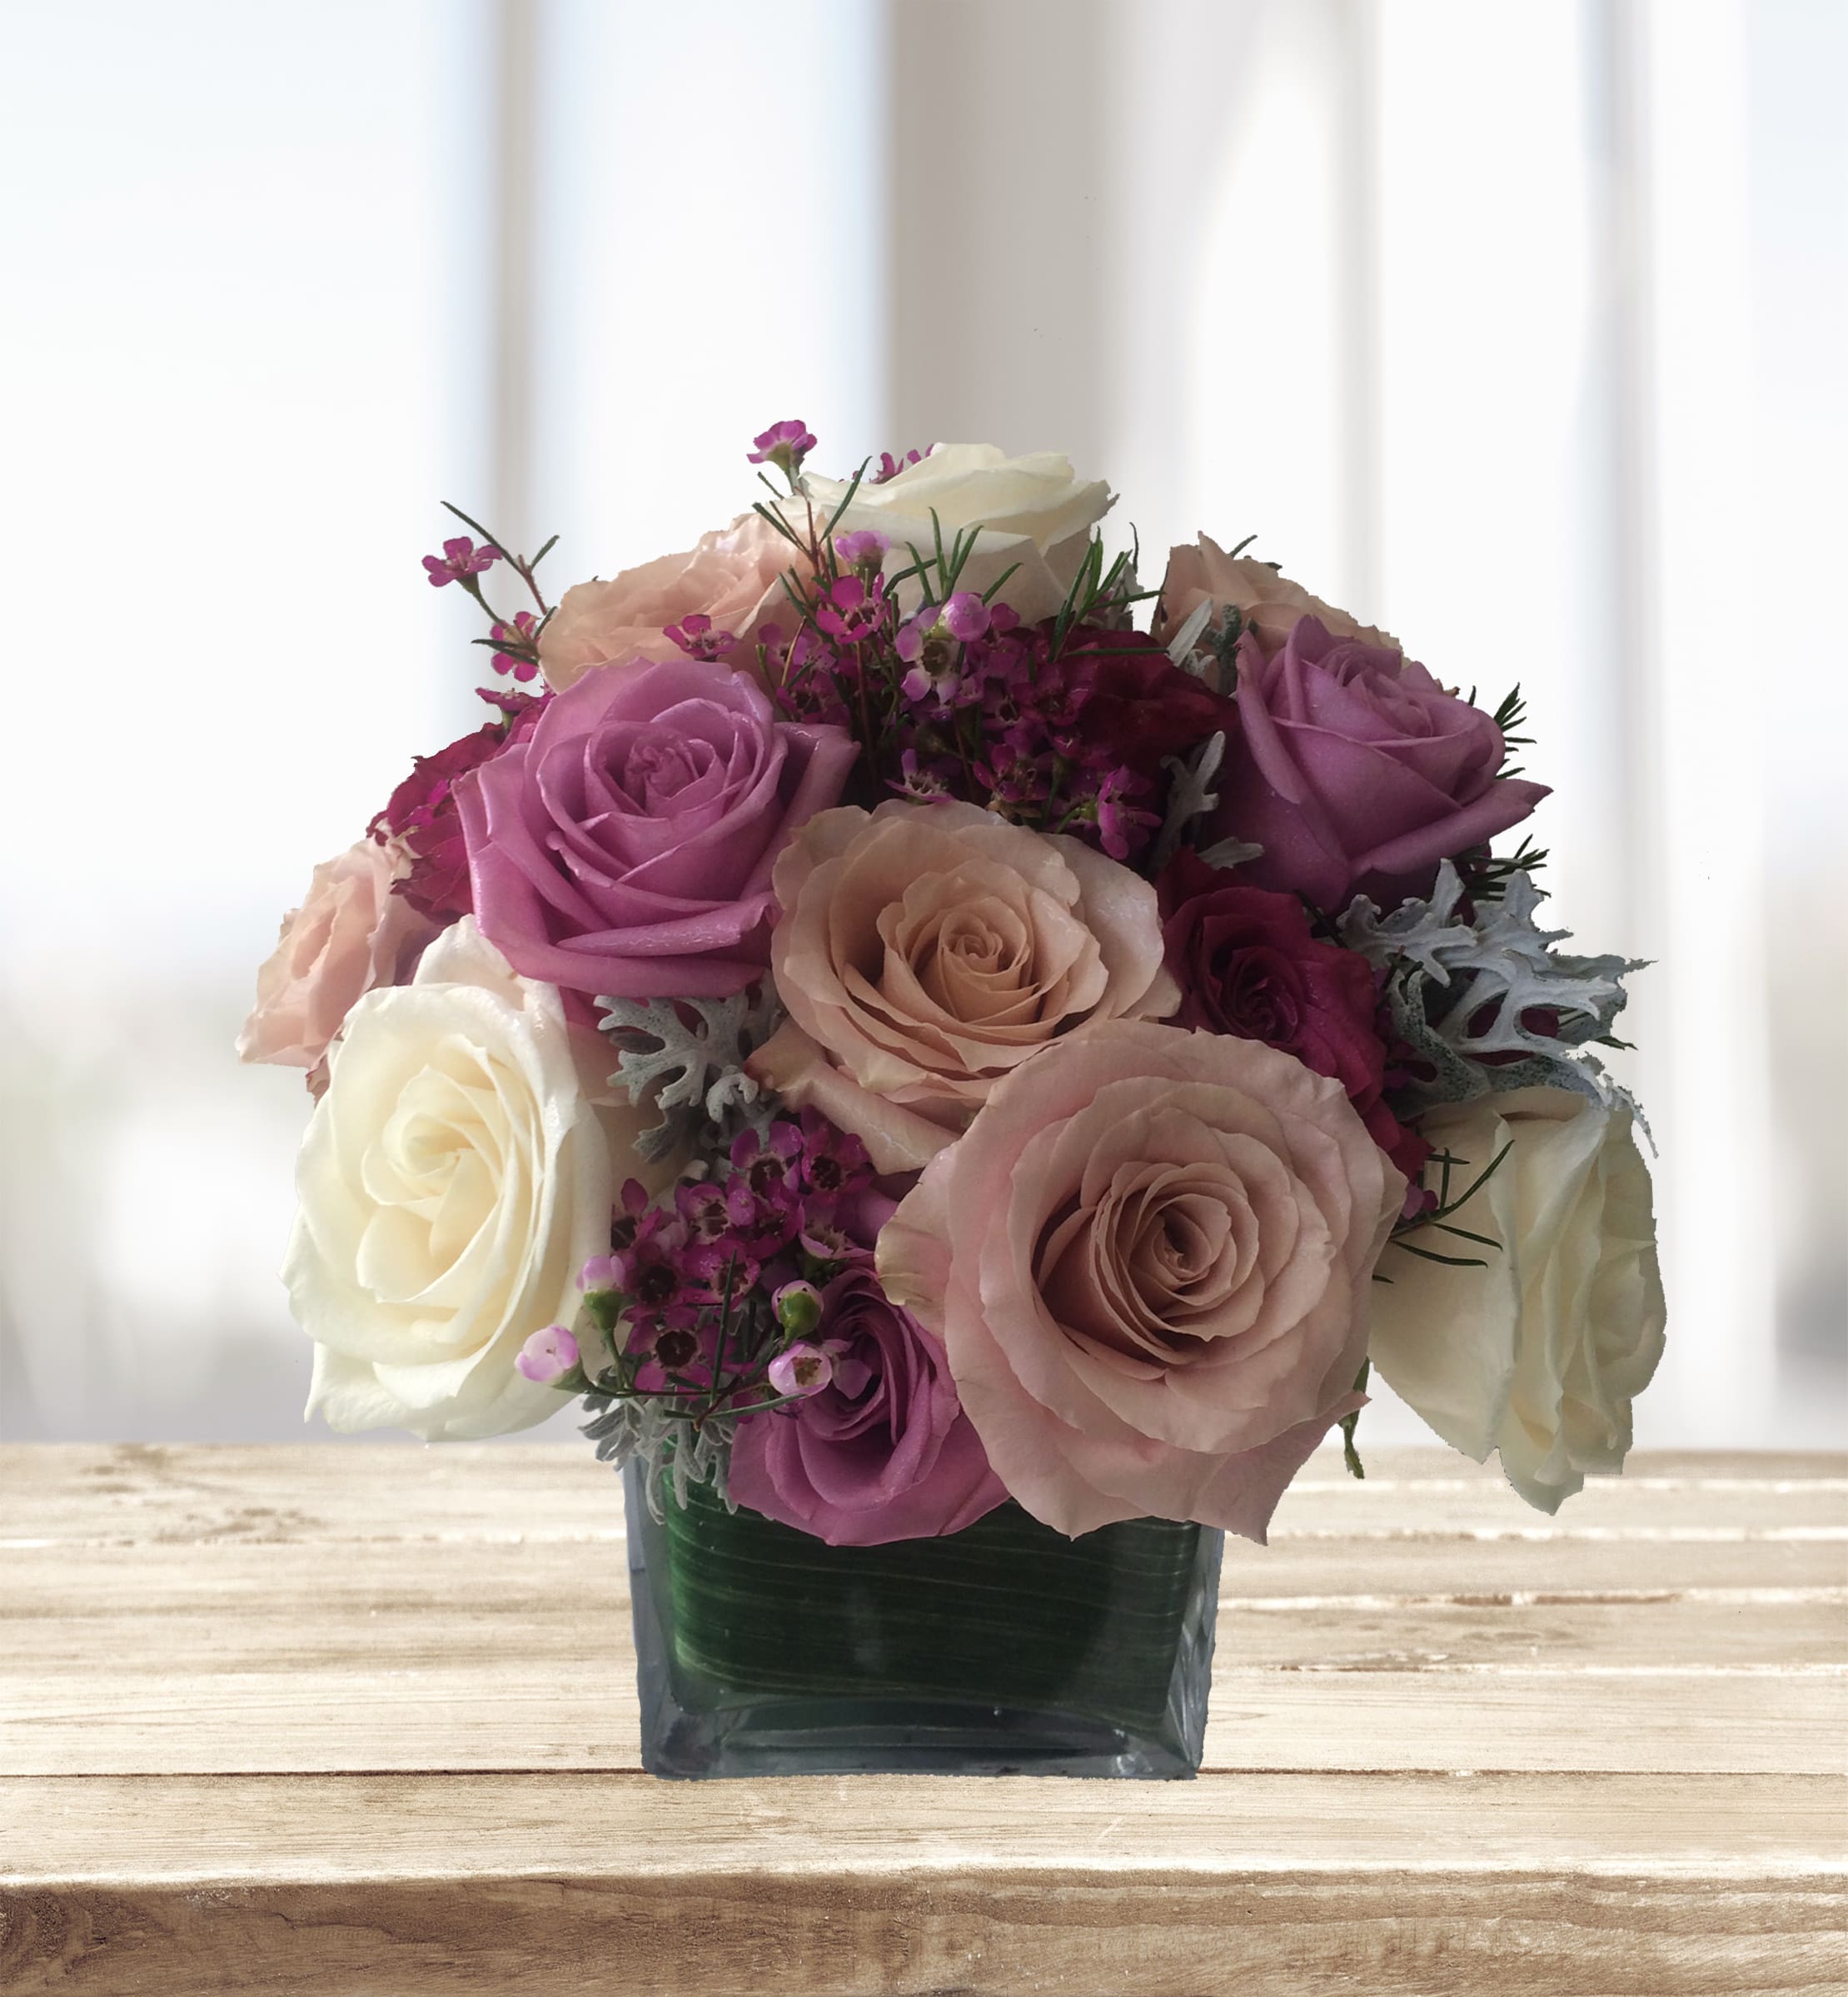 Blushing Roses - Lavender, blush and ivory roses will delight the recipient for any occasion!